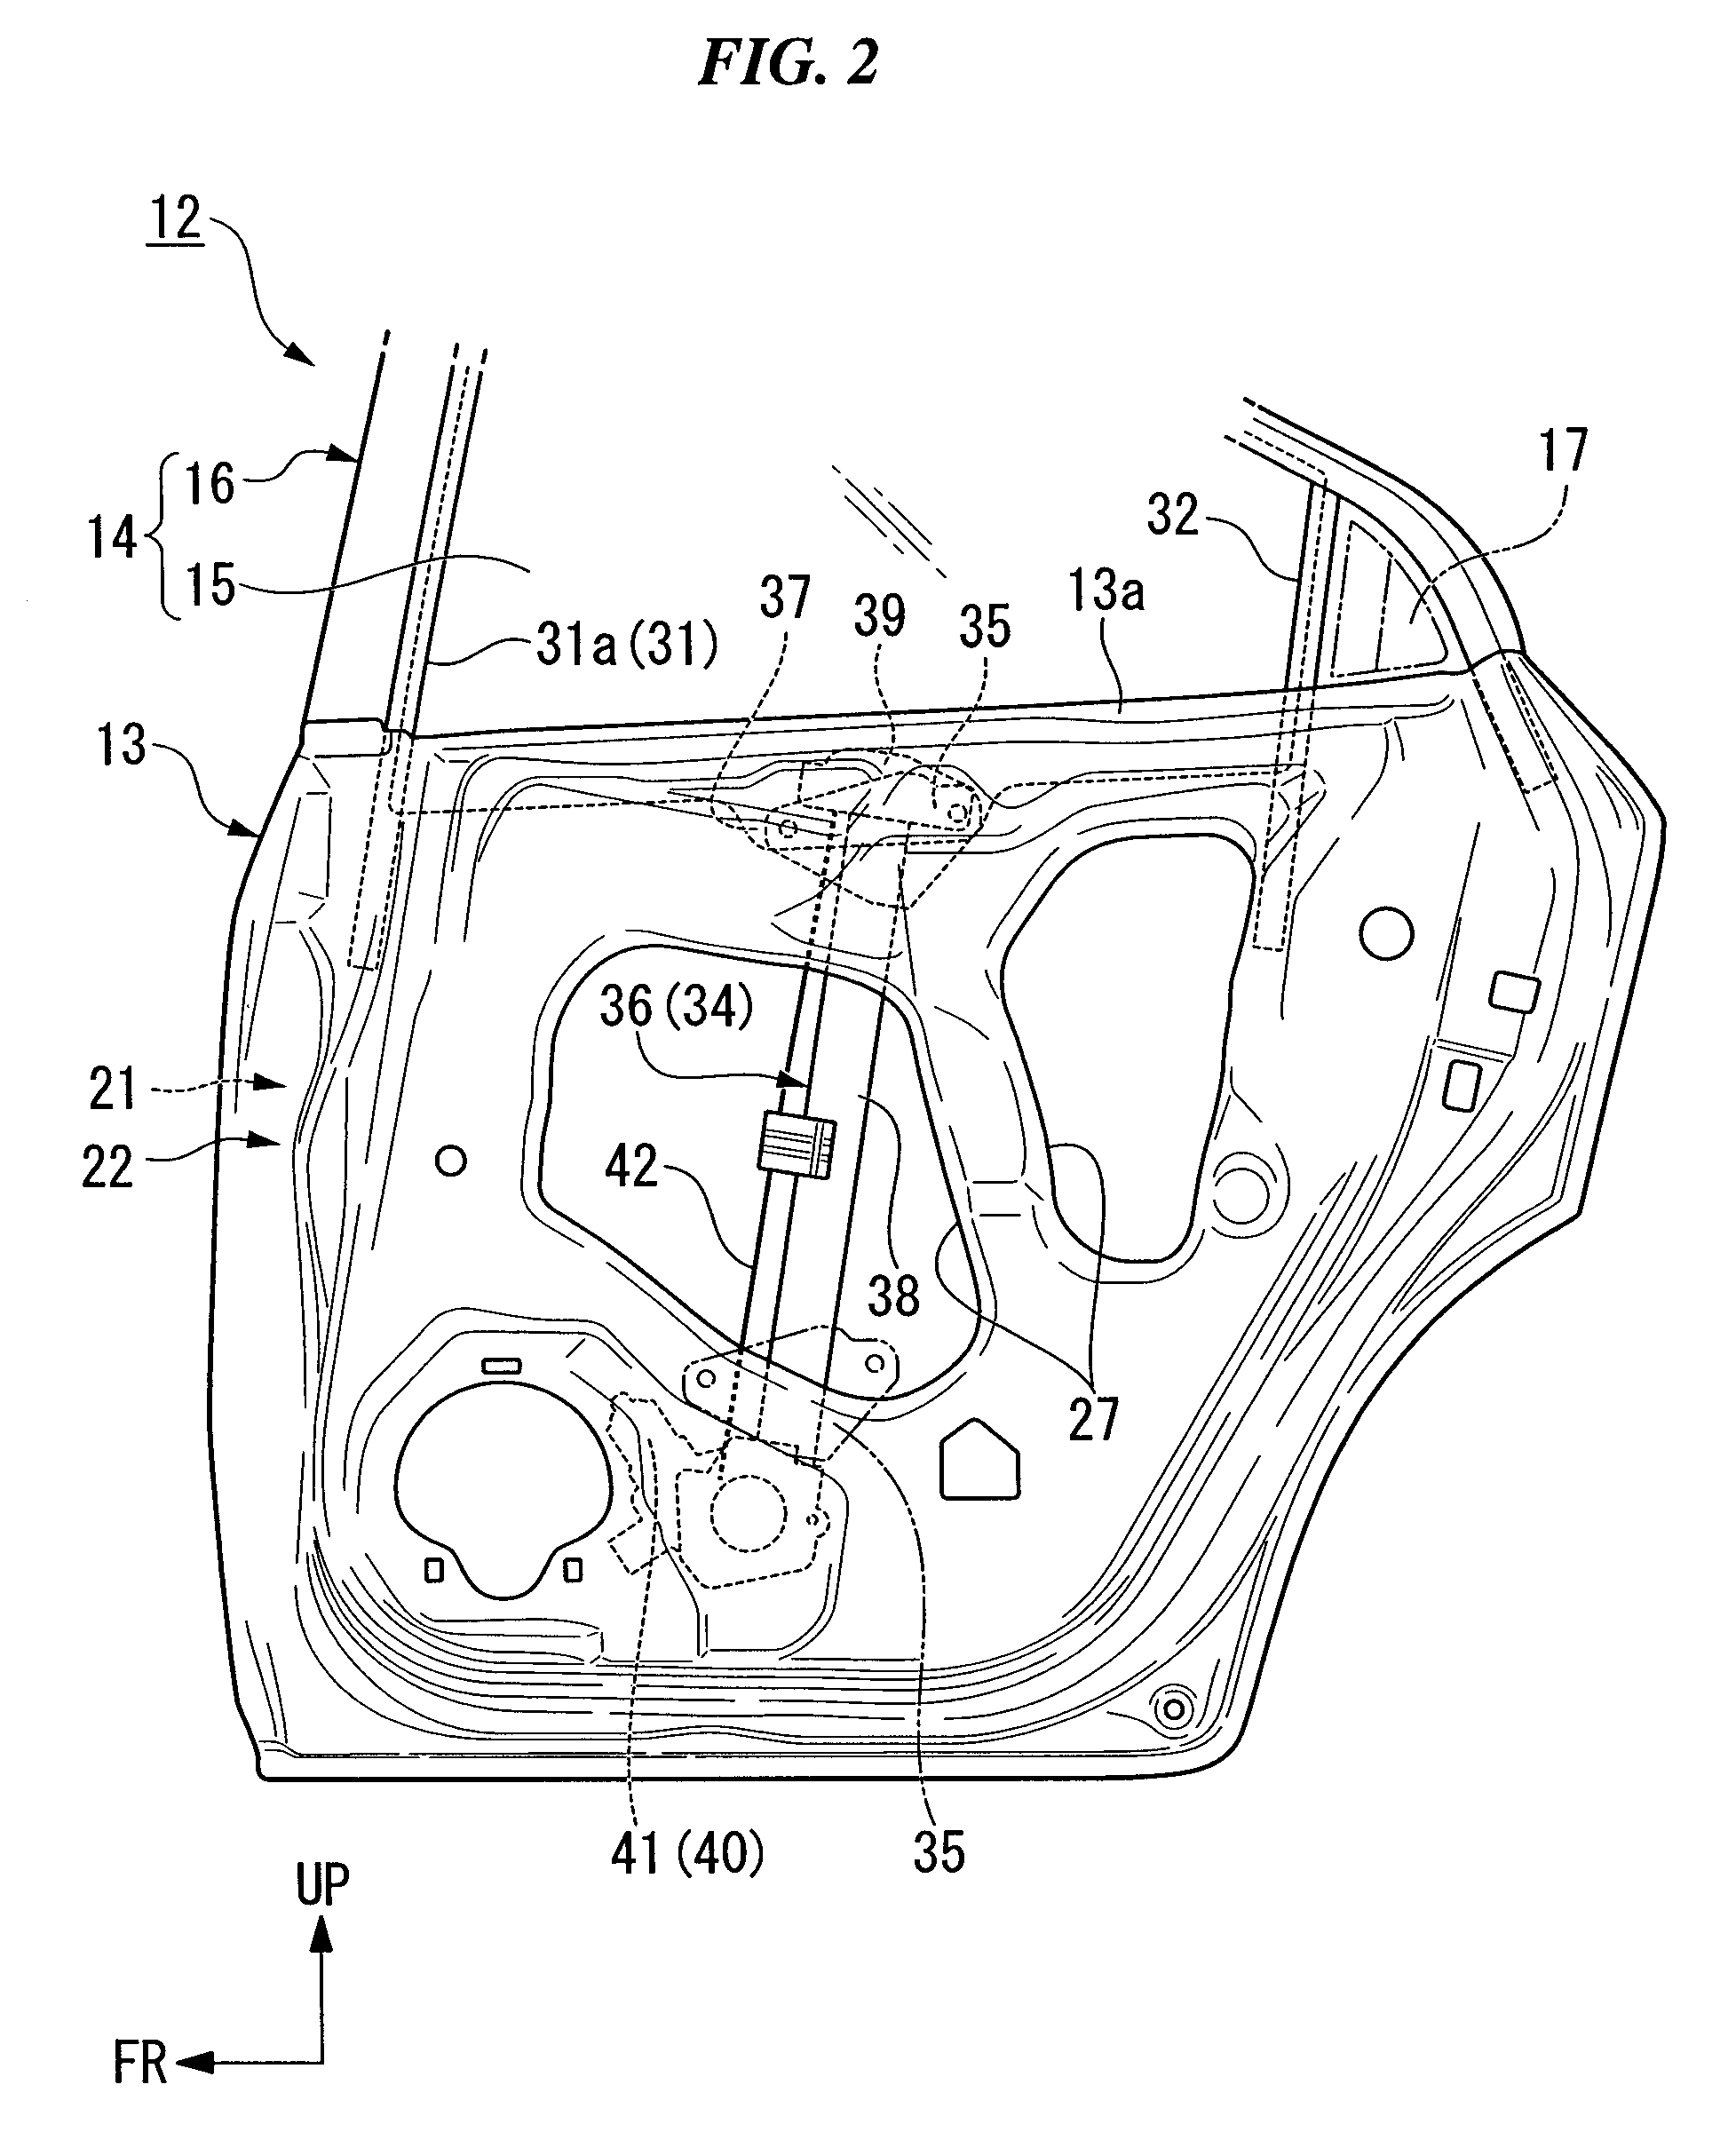 Elevating device for window glass